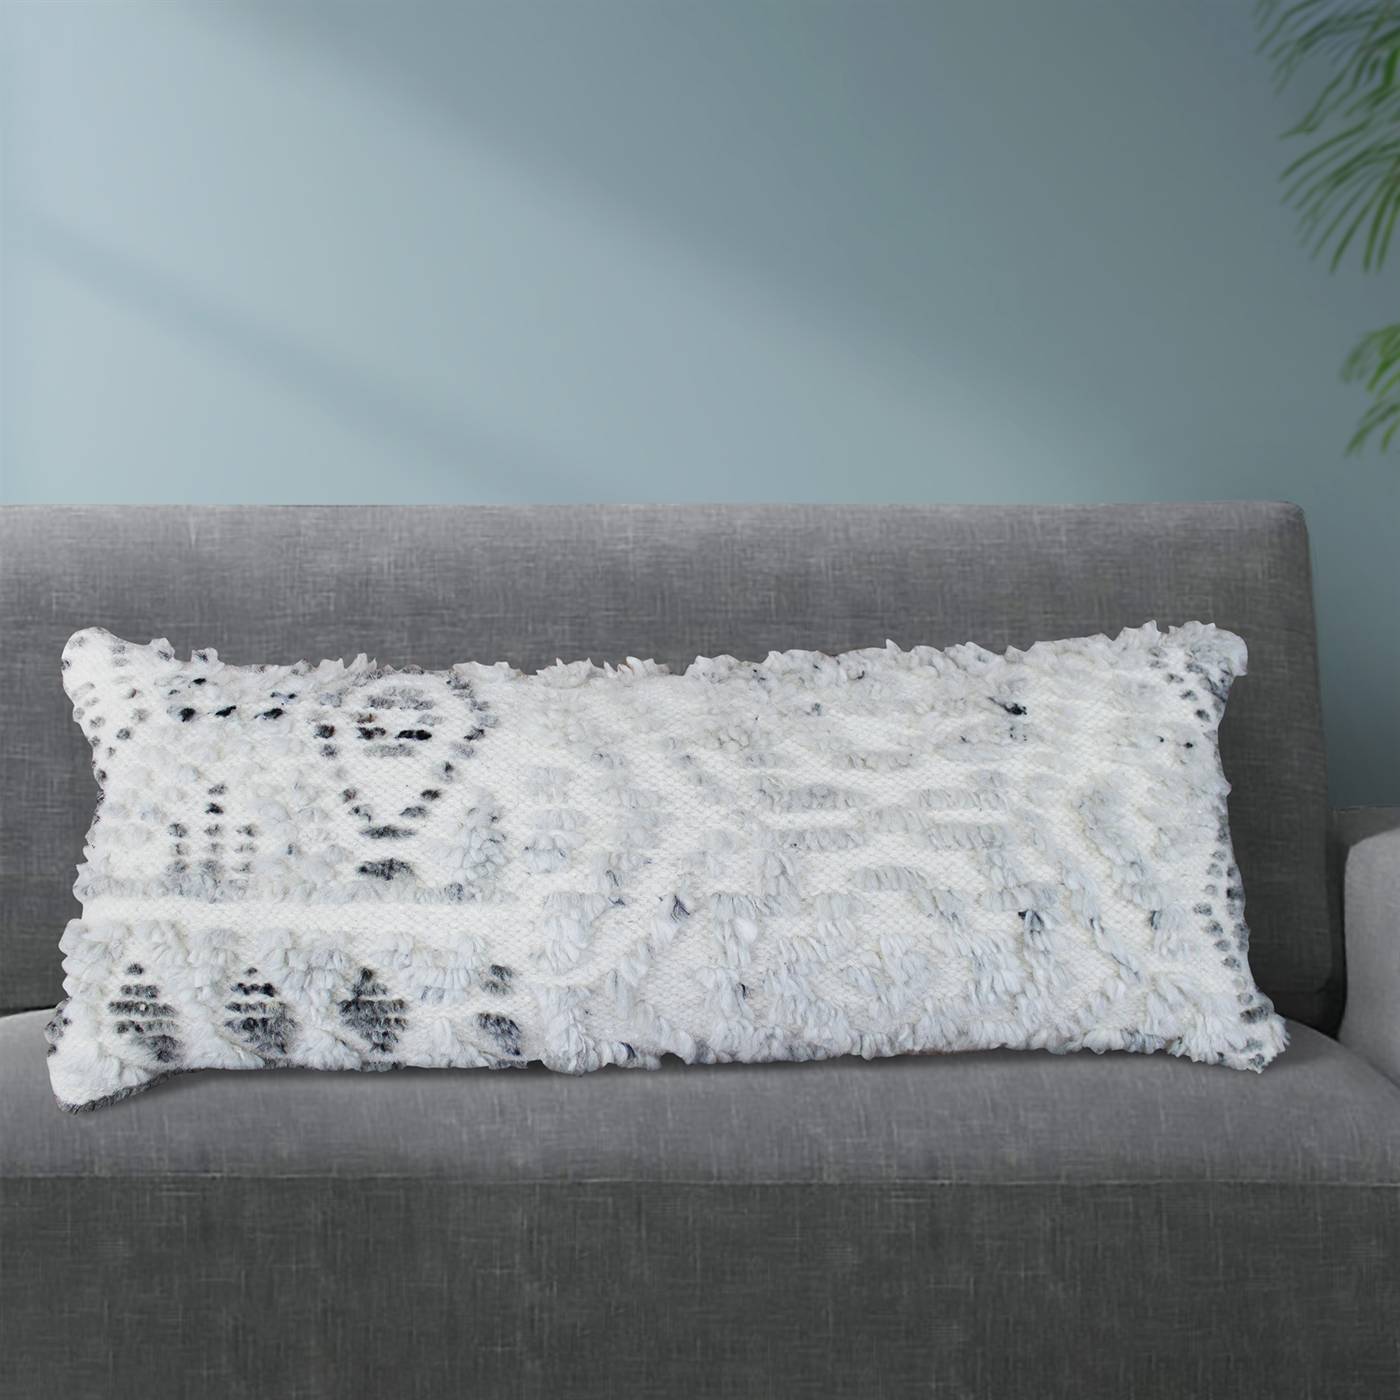 Verde Lumber Cushion-II, 36x91 cm, Natural White, Grey, Wool, Hand Knotted, Handknotted, All Cut